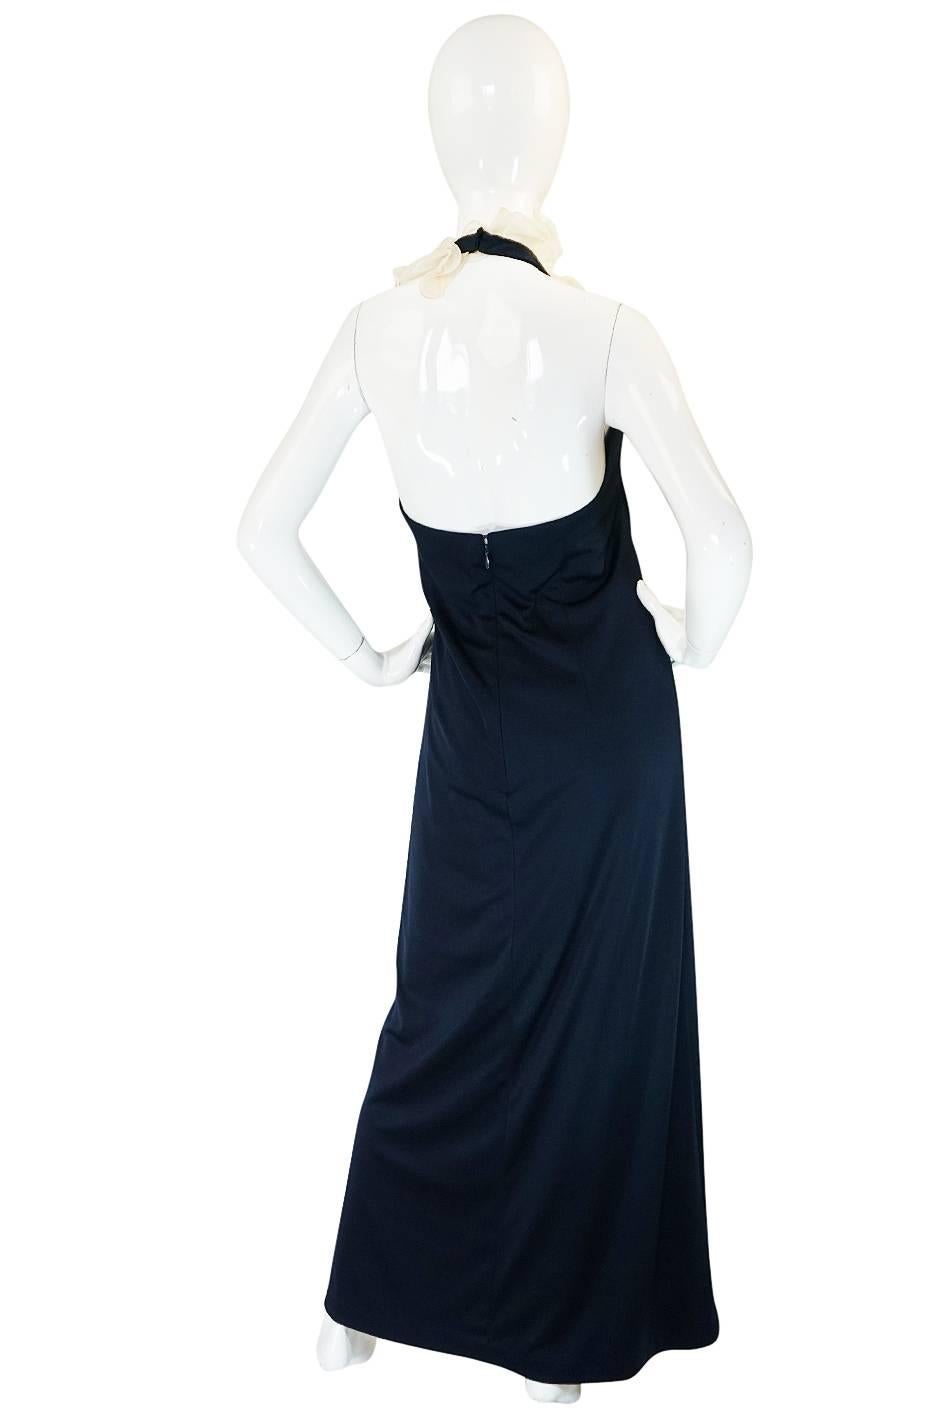 

I love the combination of jersey and ruffles on this dress combined with the slinky feel and sexy backless cut. The dress itself is made of a deep navy blue jersey so has a wonderful drape and fall to it once on the body. The halter sweeps up